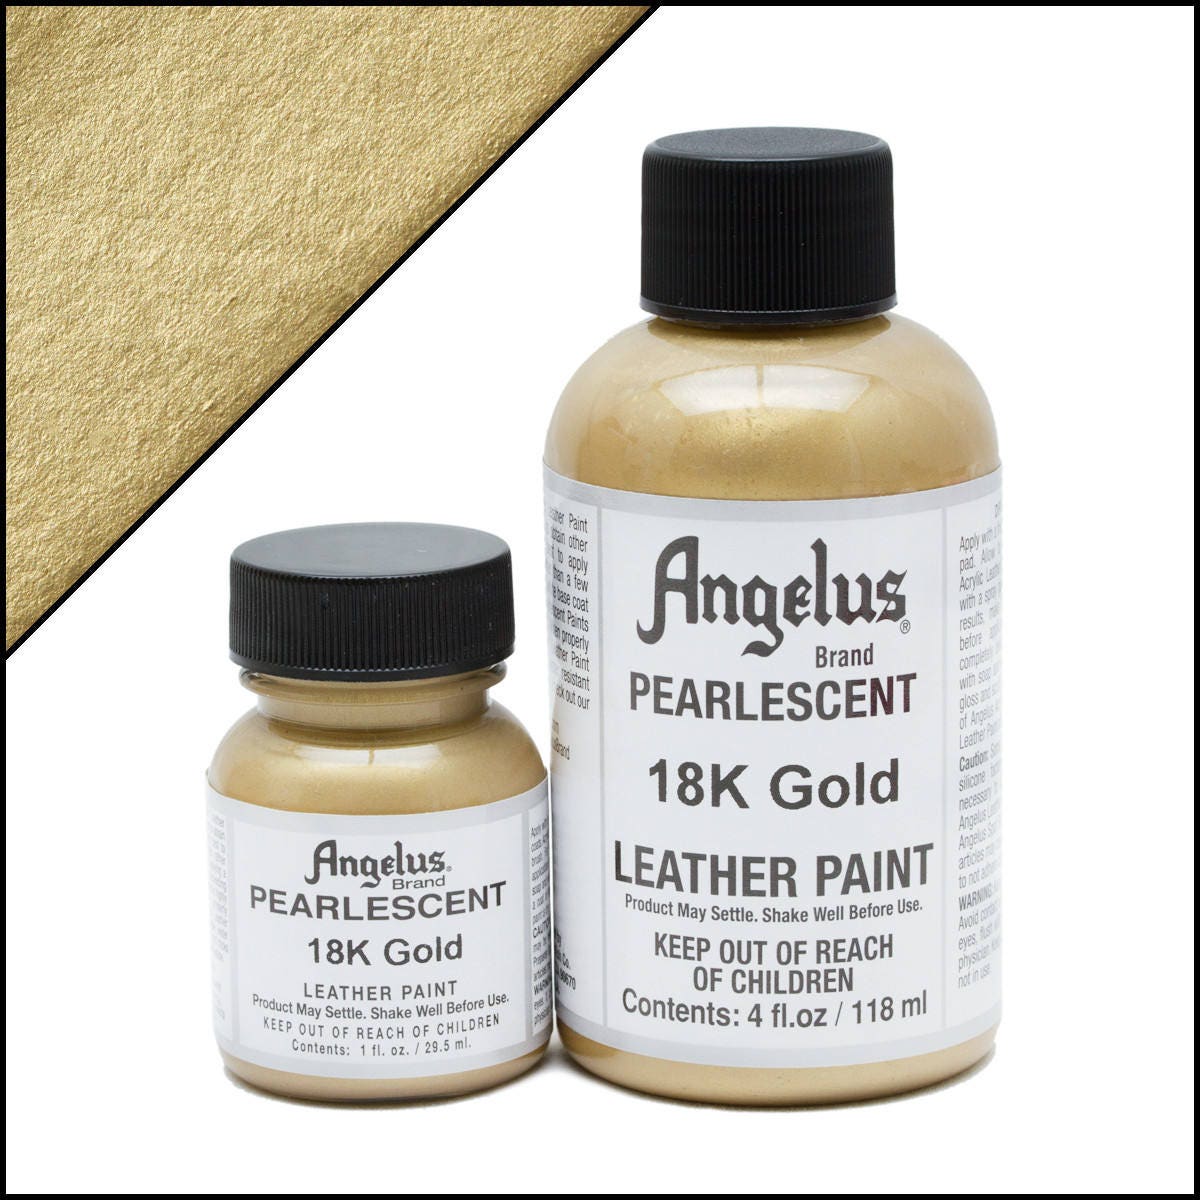 Rub n Buff Wax Metallic Gold Leaf, Rub and Buff Finish, 0.5-Fluid Ounce,  Pixiss Blending and Application Tools for Applying Gold Leaf Paint